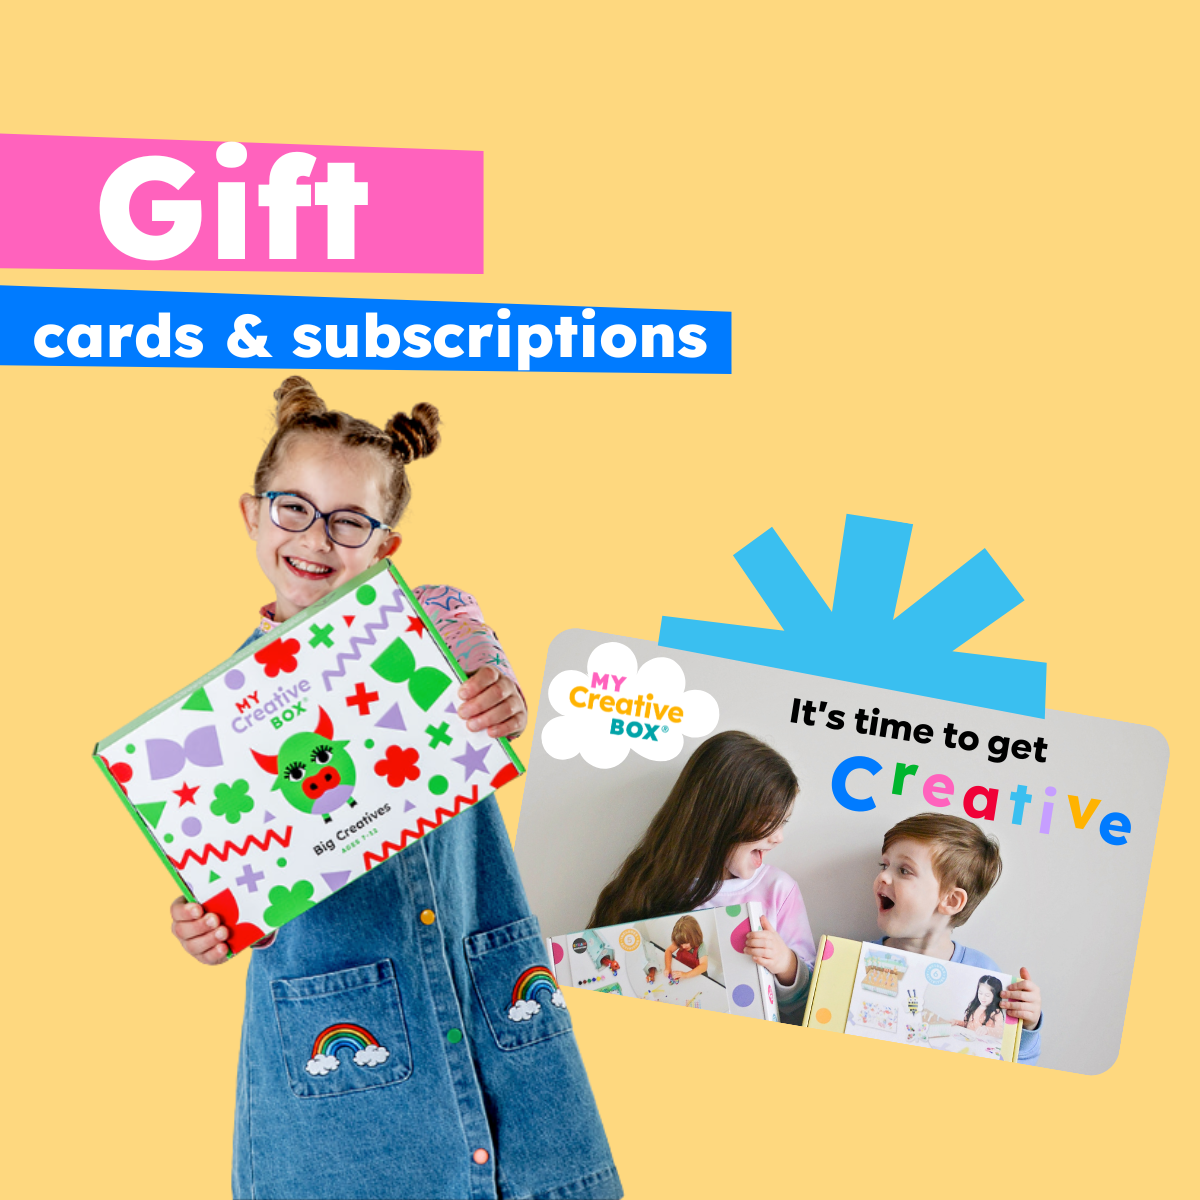 Gift Cards & Subscriptions